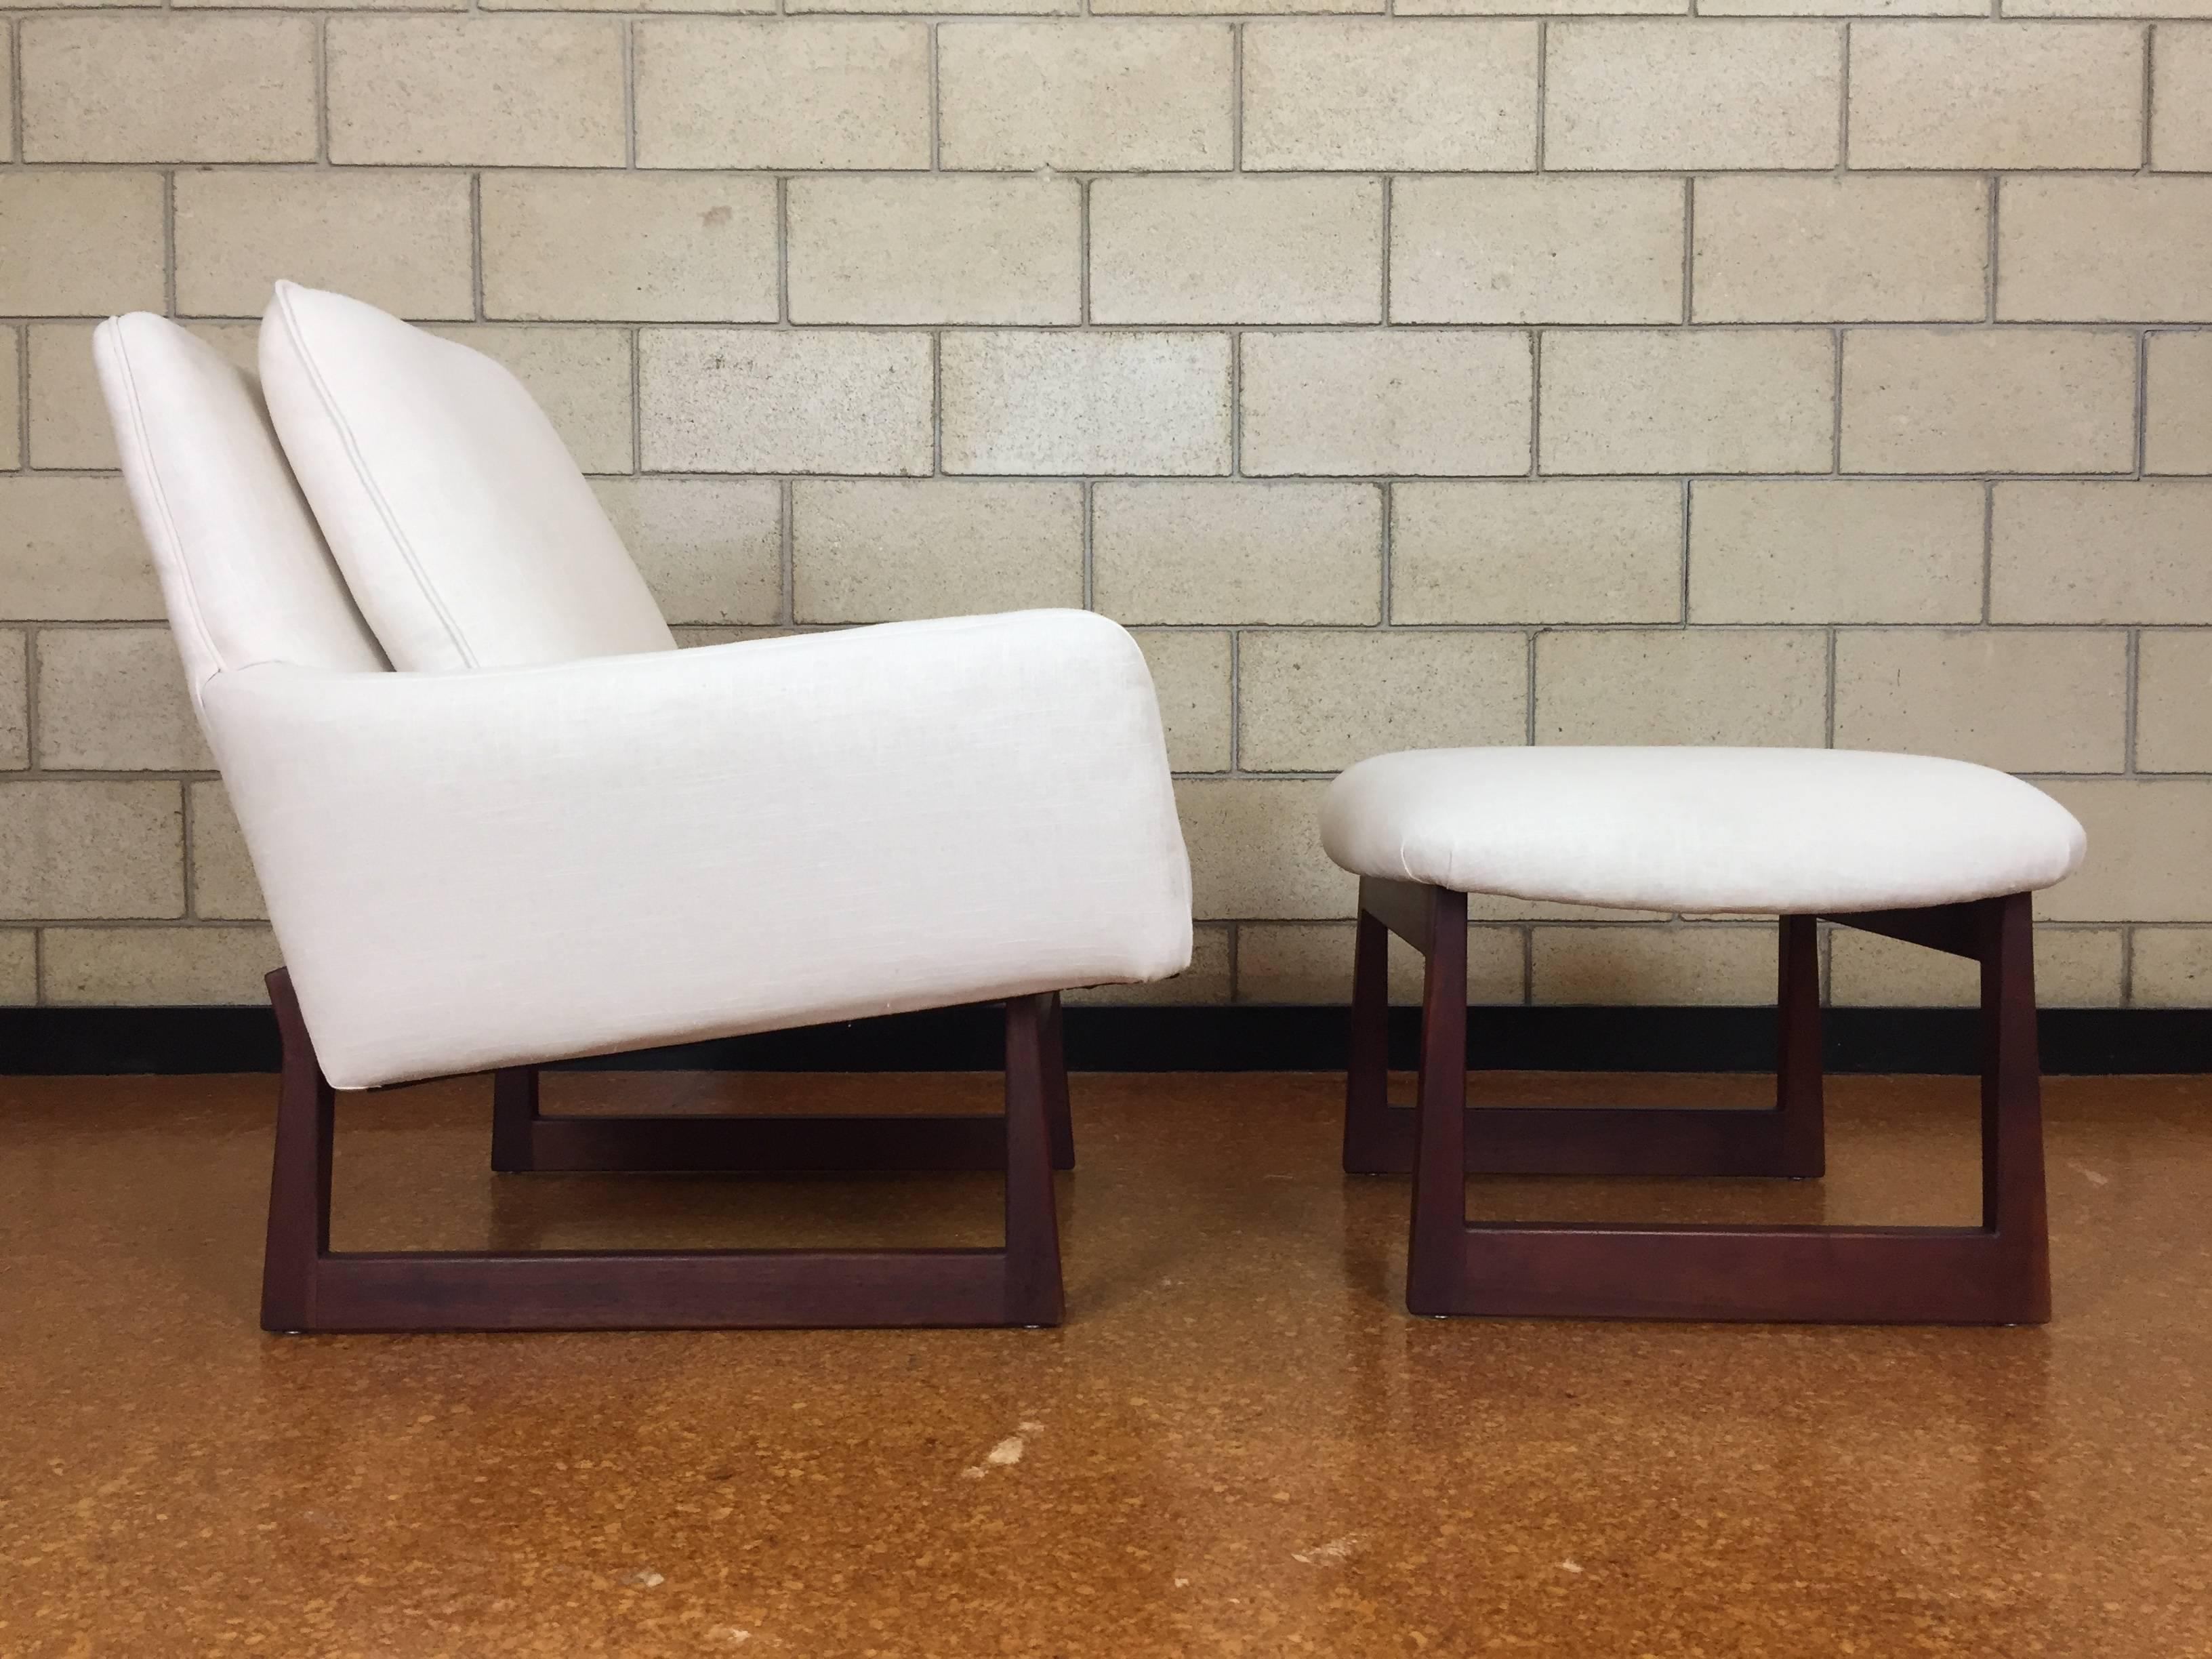 Mid-Century Modern Stunning Jens Risom Lounge Chair and Ottoman Reupholstered in Cream Linen